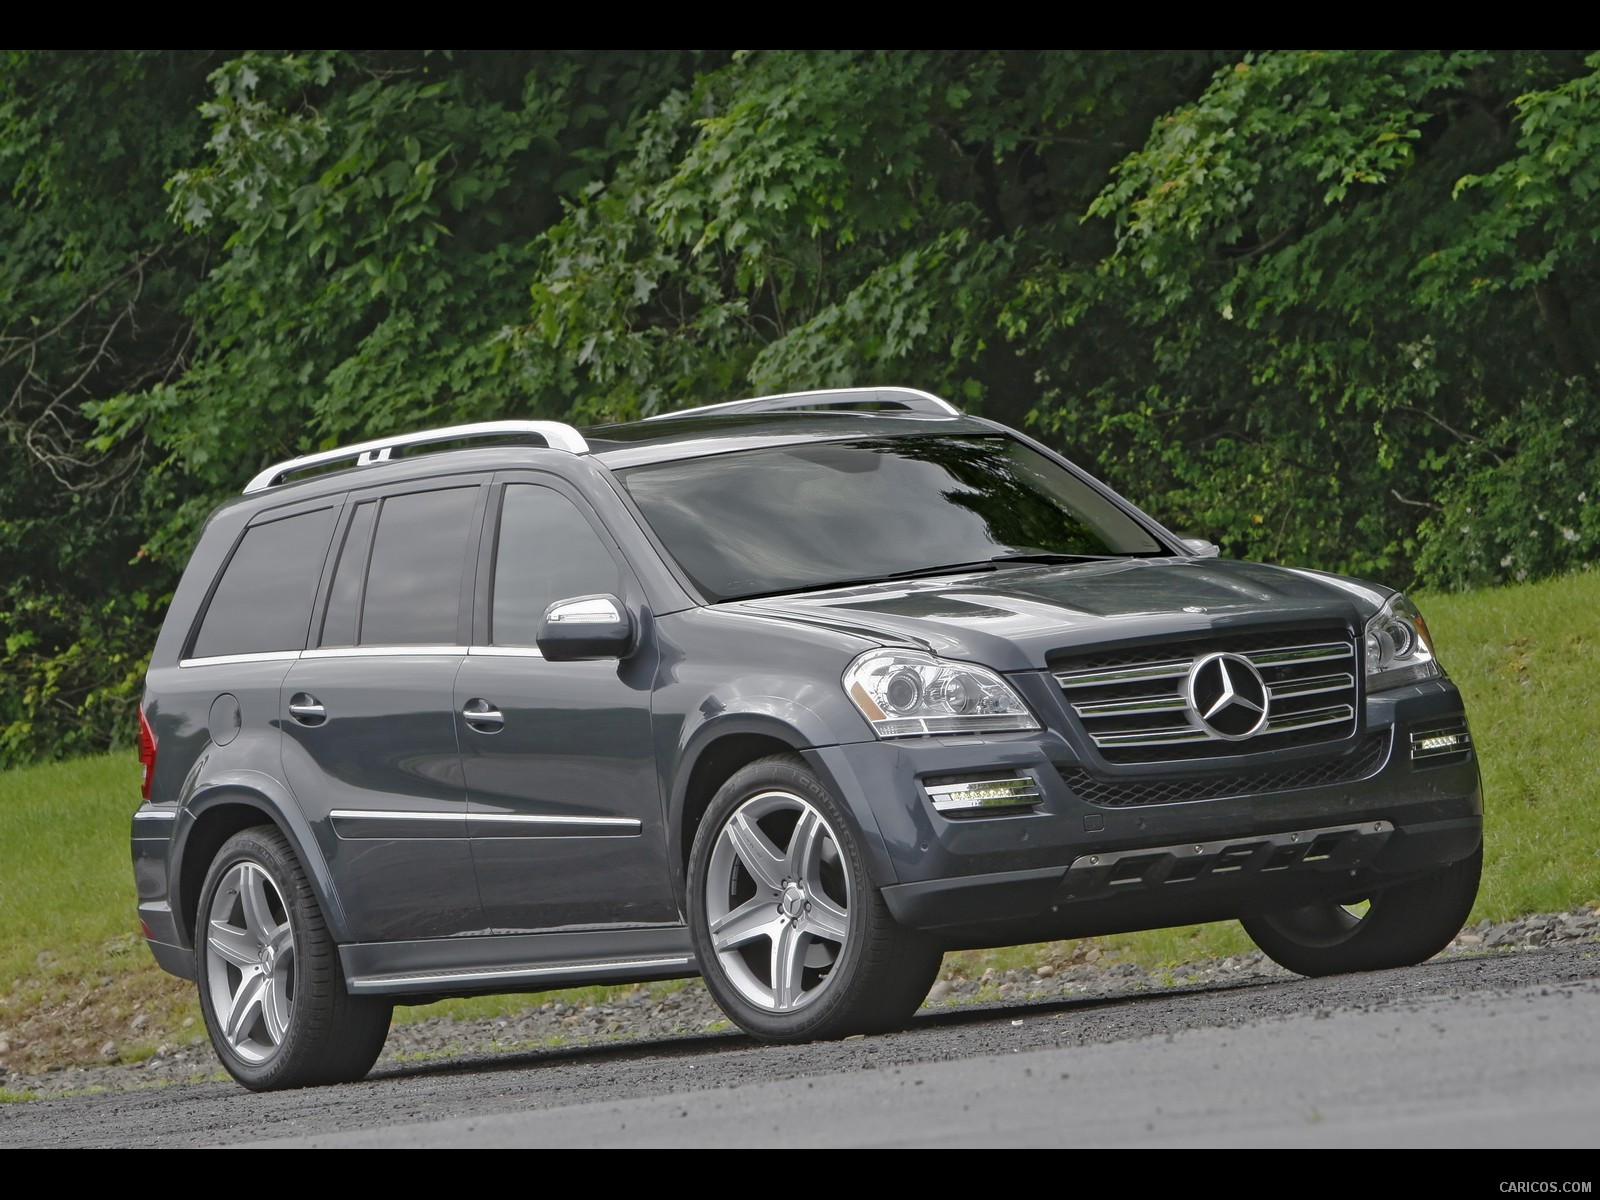 2010 Mercedes-Benz GL550 - Front, #51 of 112